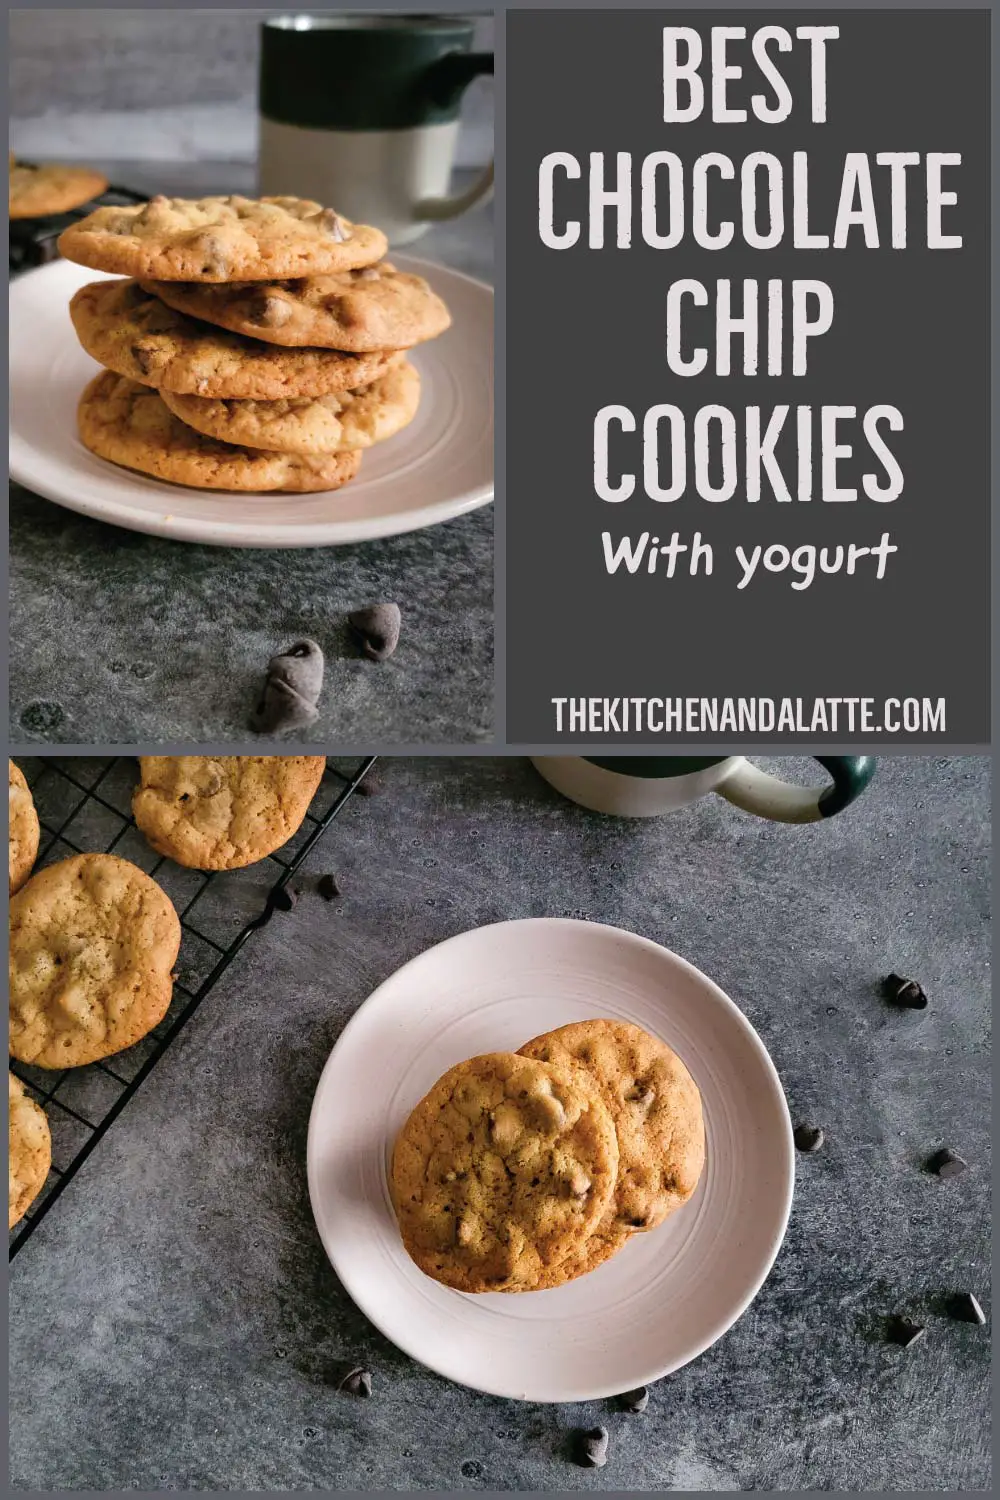 Best chocolate chip cookies with yogurt Pinterest graphic. Chocolate chip cookies on a small plate with a cup of coffee next to them.